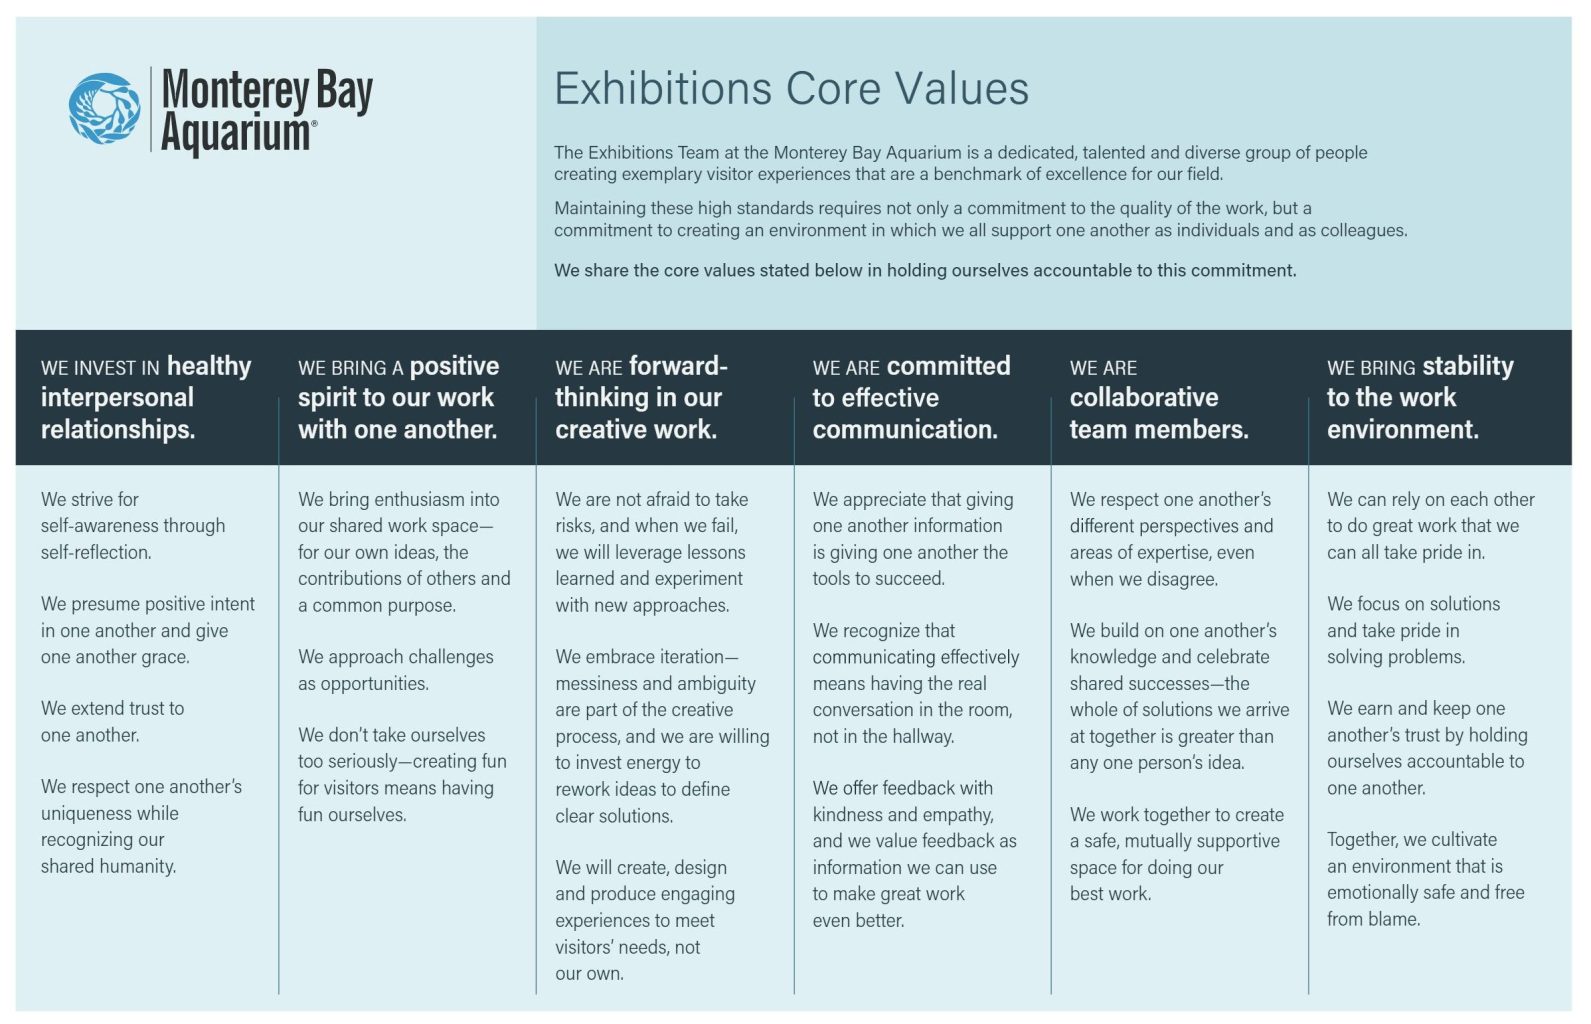 A chart showing the finished core values for the exhibitions team: "We invest in healthy interpersonal relationships," "We bring a positive spirit to our work with one another," "We are forward-thinking in our creative work," "We are committed to effective communication," "We are collaborative team members," and "We bring stability to the work environment."